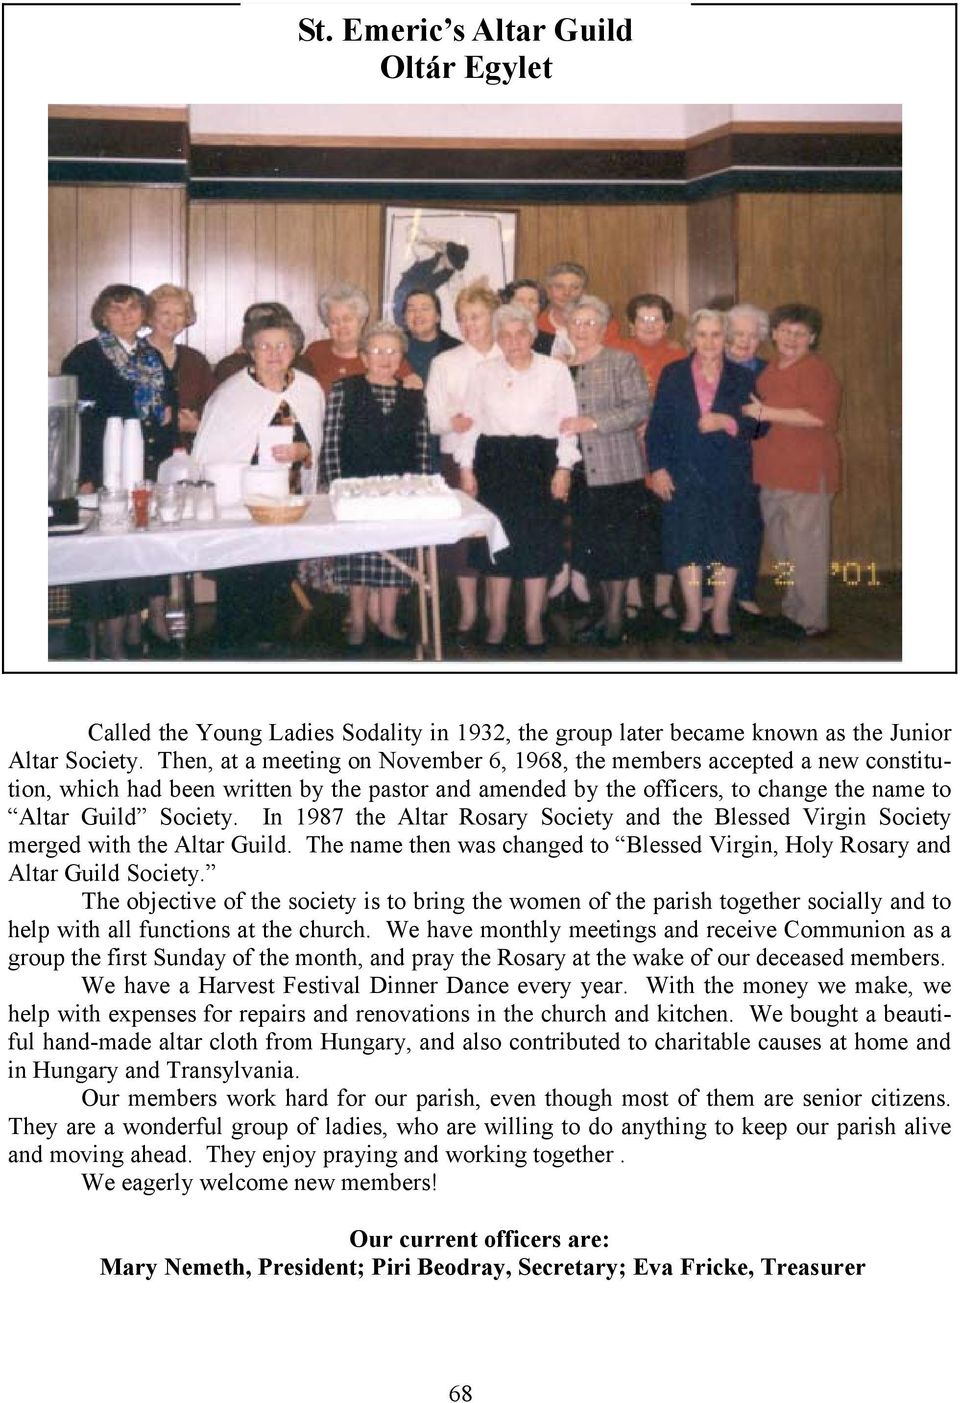 In 1987 the Altar Rosary Society and the Blessed Virgin Society merged with the Altar Guild. The name then was changed to Blessed Virgin, Holy Rosary and Altar Guild Society.